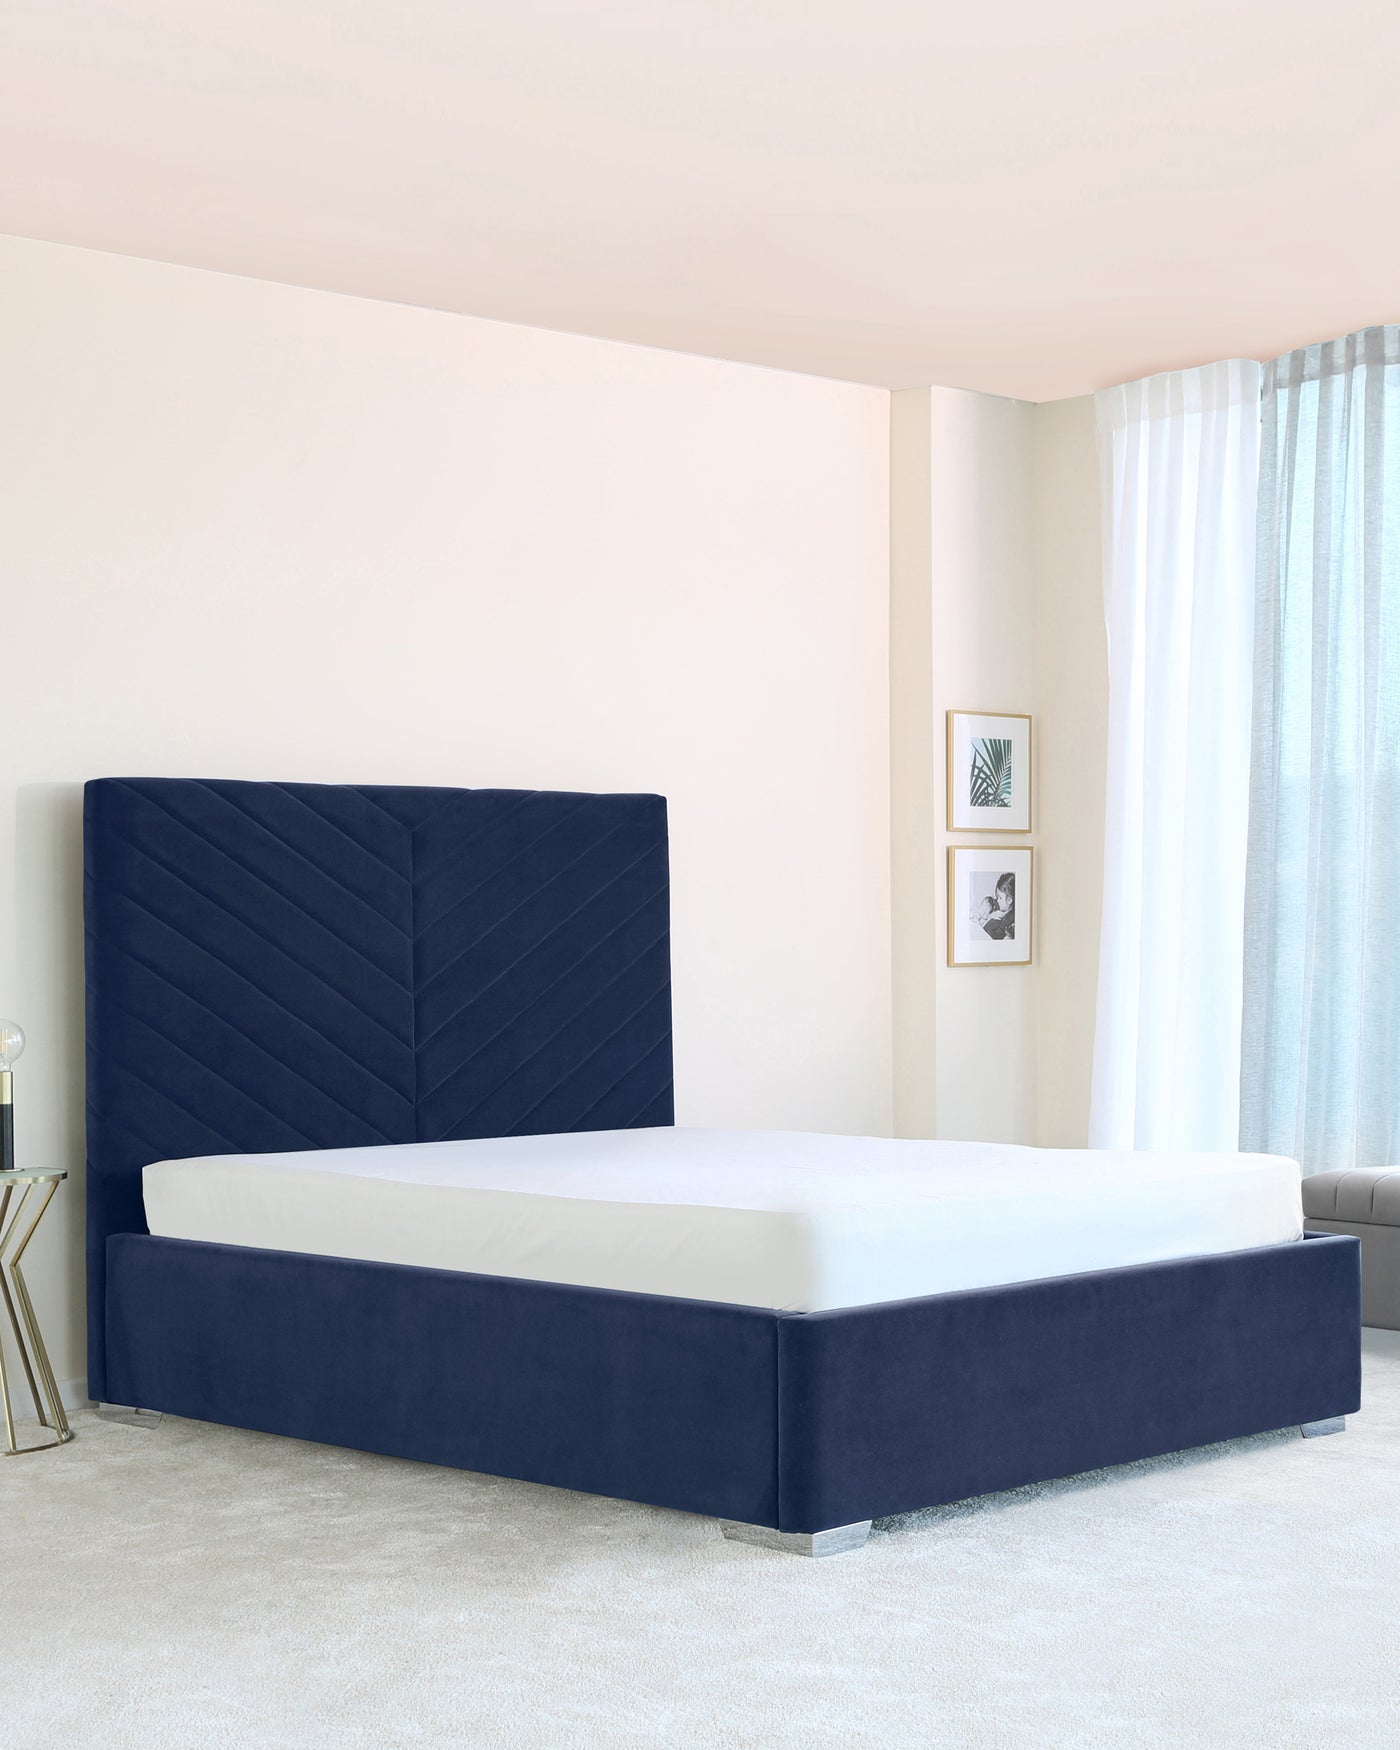 Elegant modern bedroom featuring a navy blue upholstered platform bed with a high, chevron-patterned headboard and matching base.